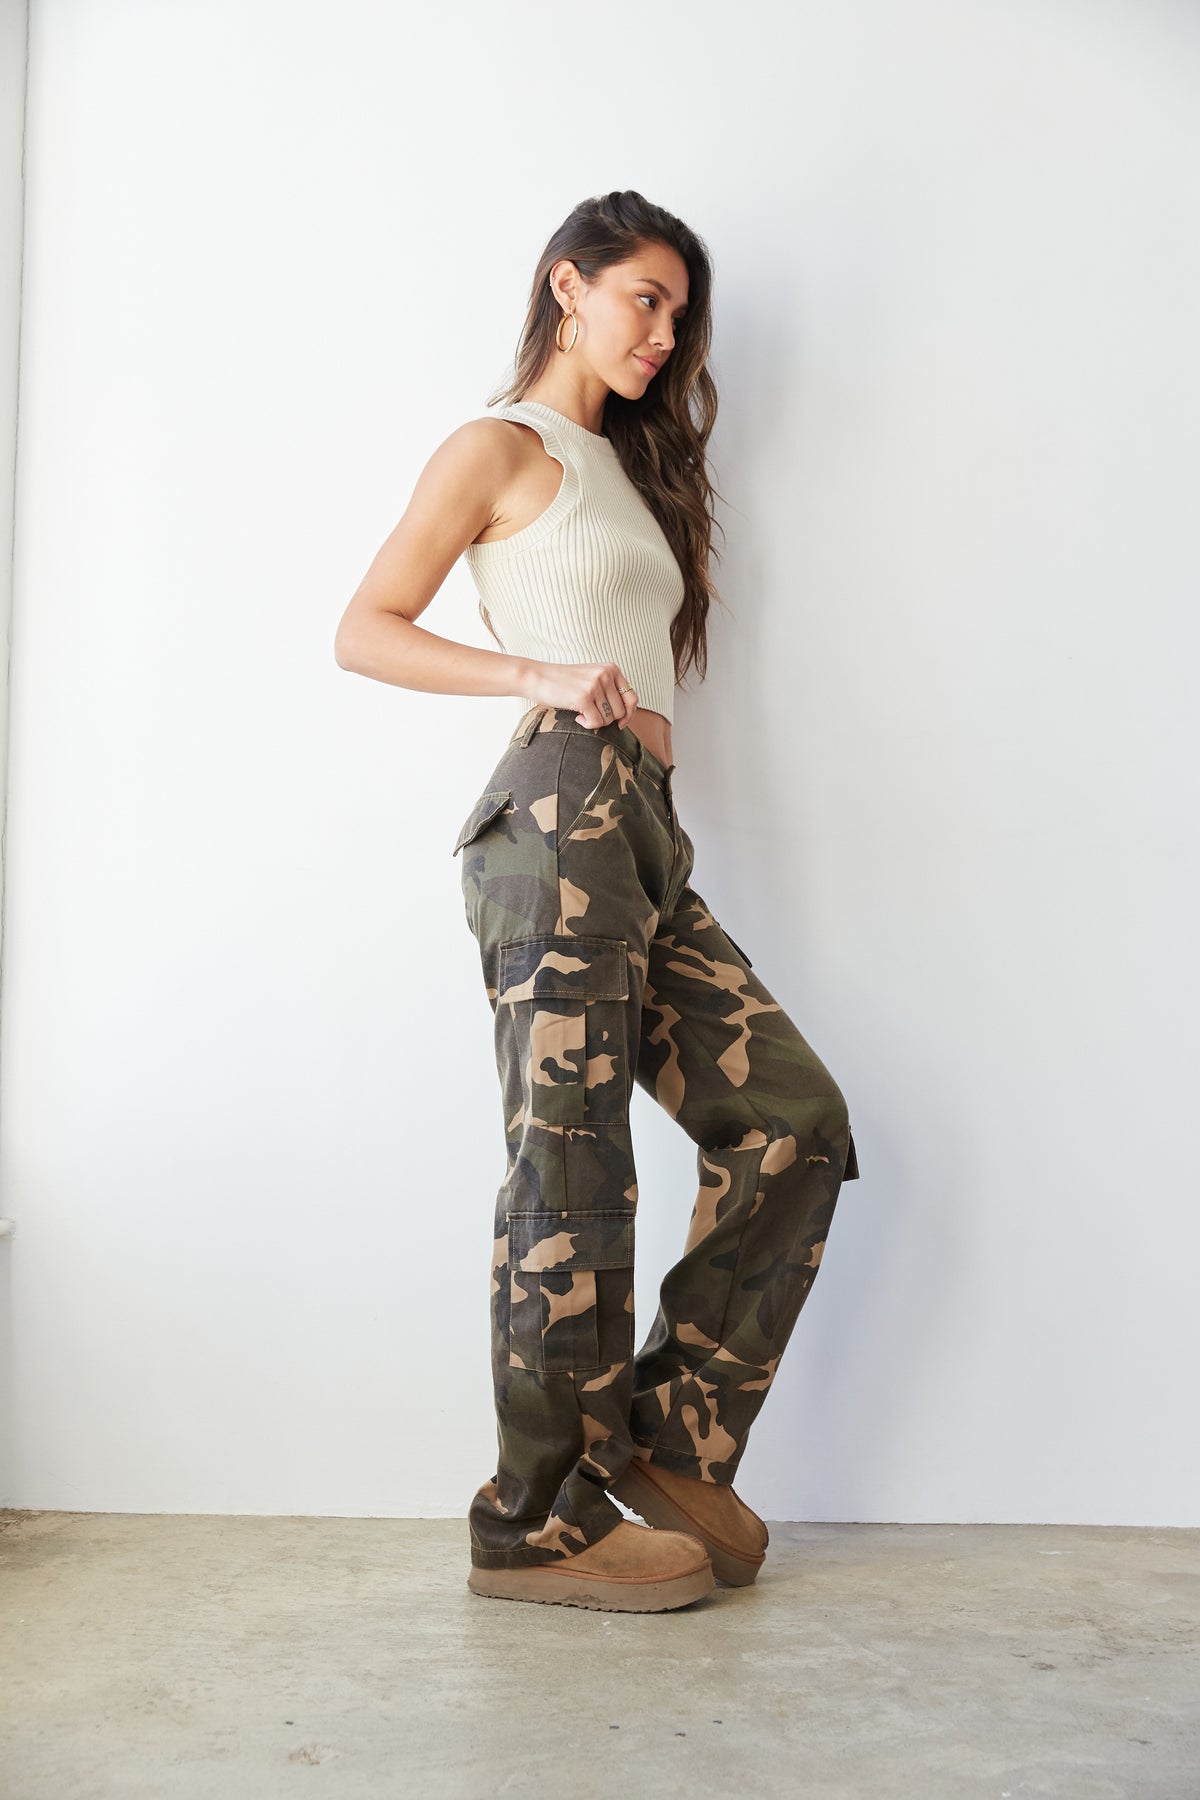 street style outfit inspo - baggy camo cargo pants - army green wide leg pants